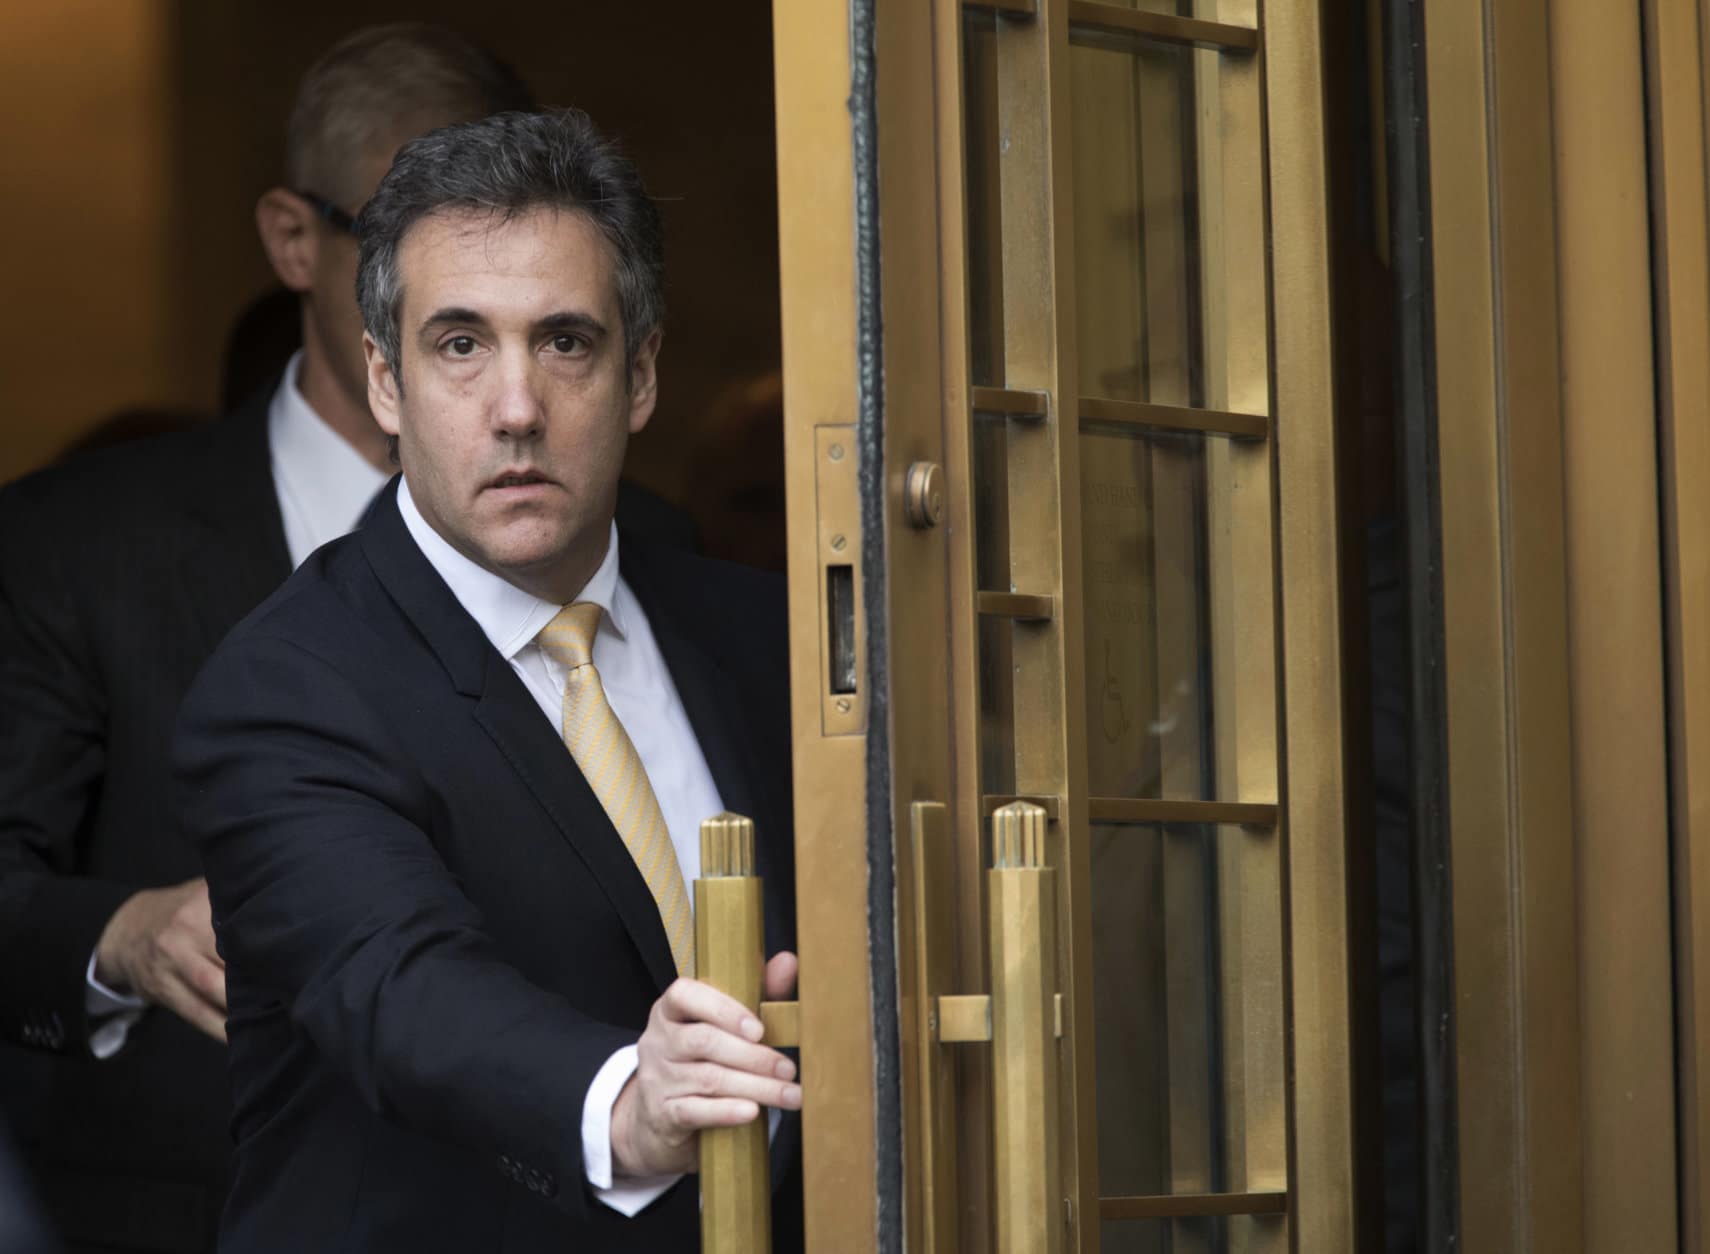 Michael Cohen leaves Federal court in New York on Aug. 21, 2018, after pleading guilty to charges including campaign finance fraud stemming from hush money payments to porn actress Stormy Daniels and ex-Playboy model Karen McDougal. (AP Photo/Mary Altaffer)